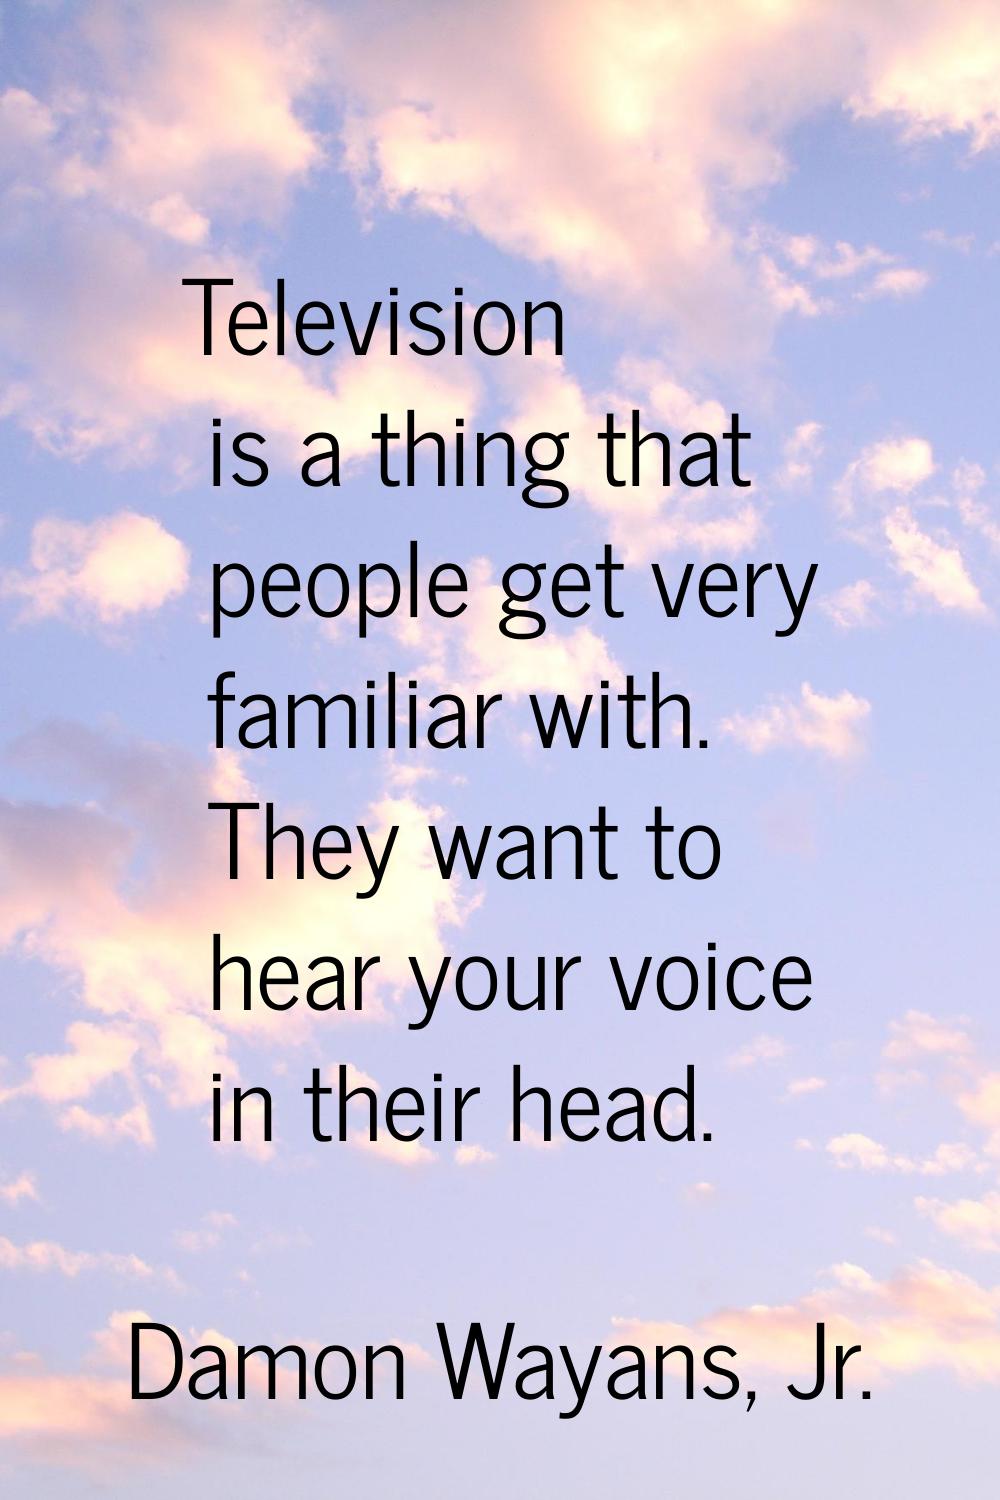 Television is a thing that people get very familiar with. They want to hear your voice in their hea